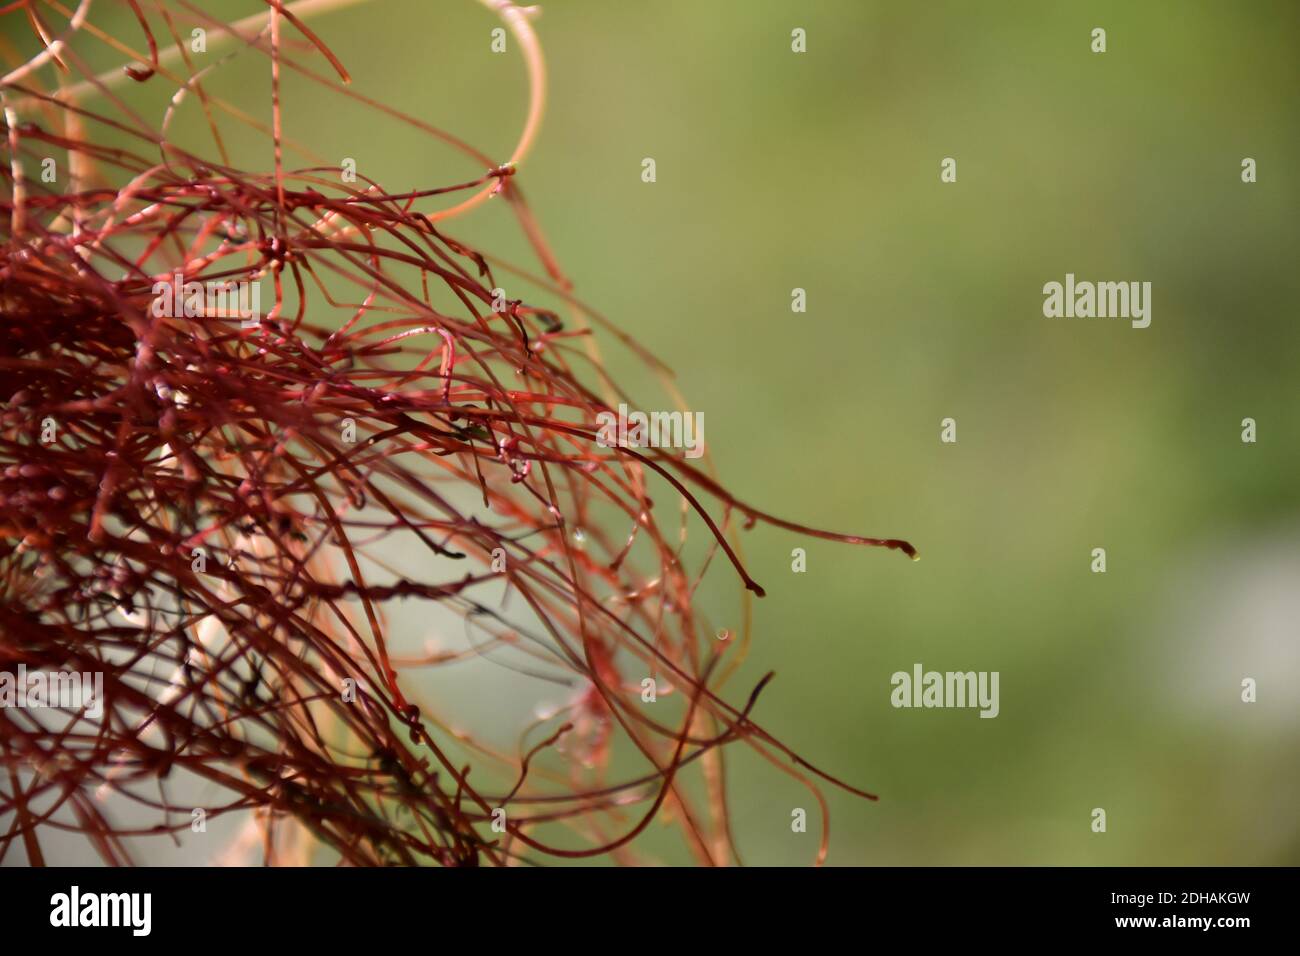 Detail of Cuscuta epiphytum stolons in mountain, seen from left to right. Stock Photo